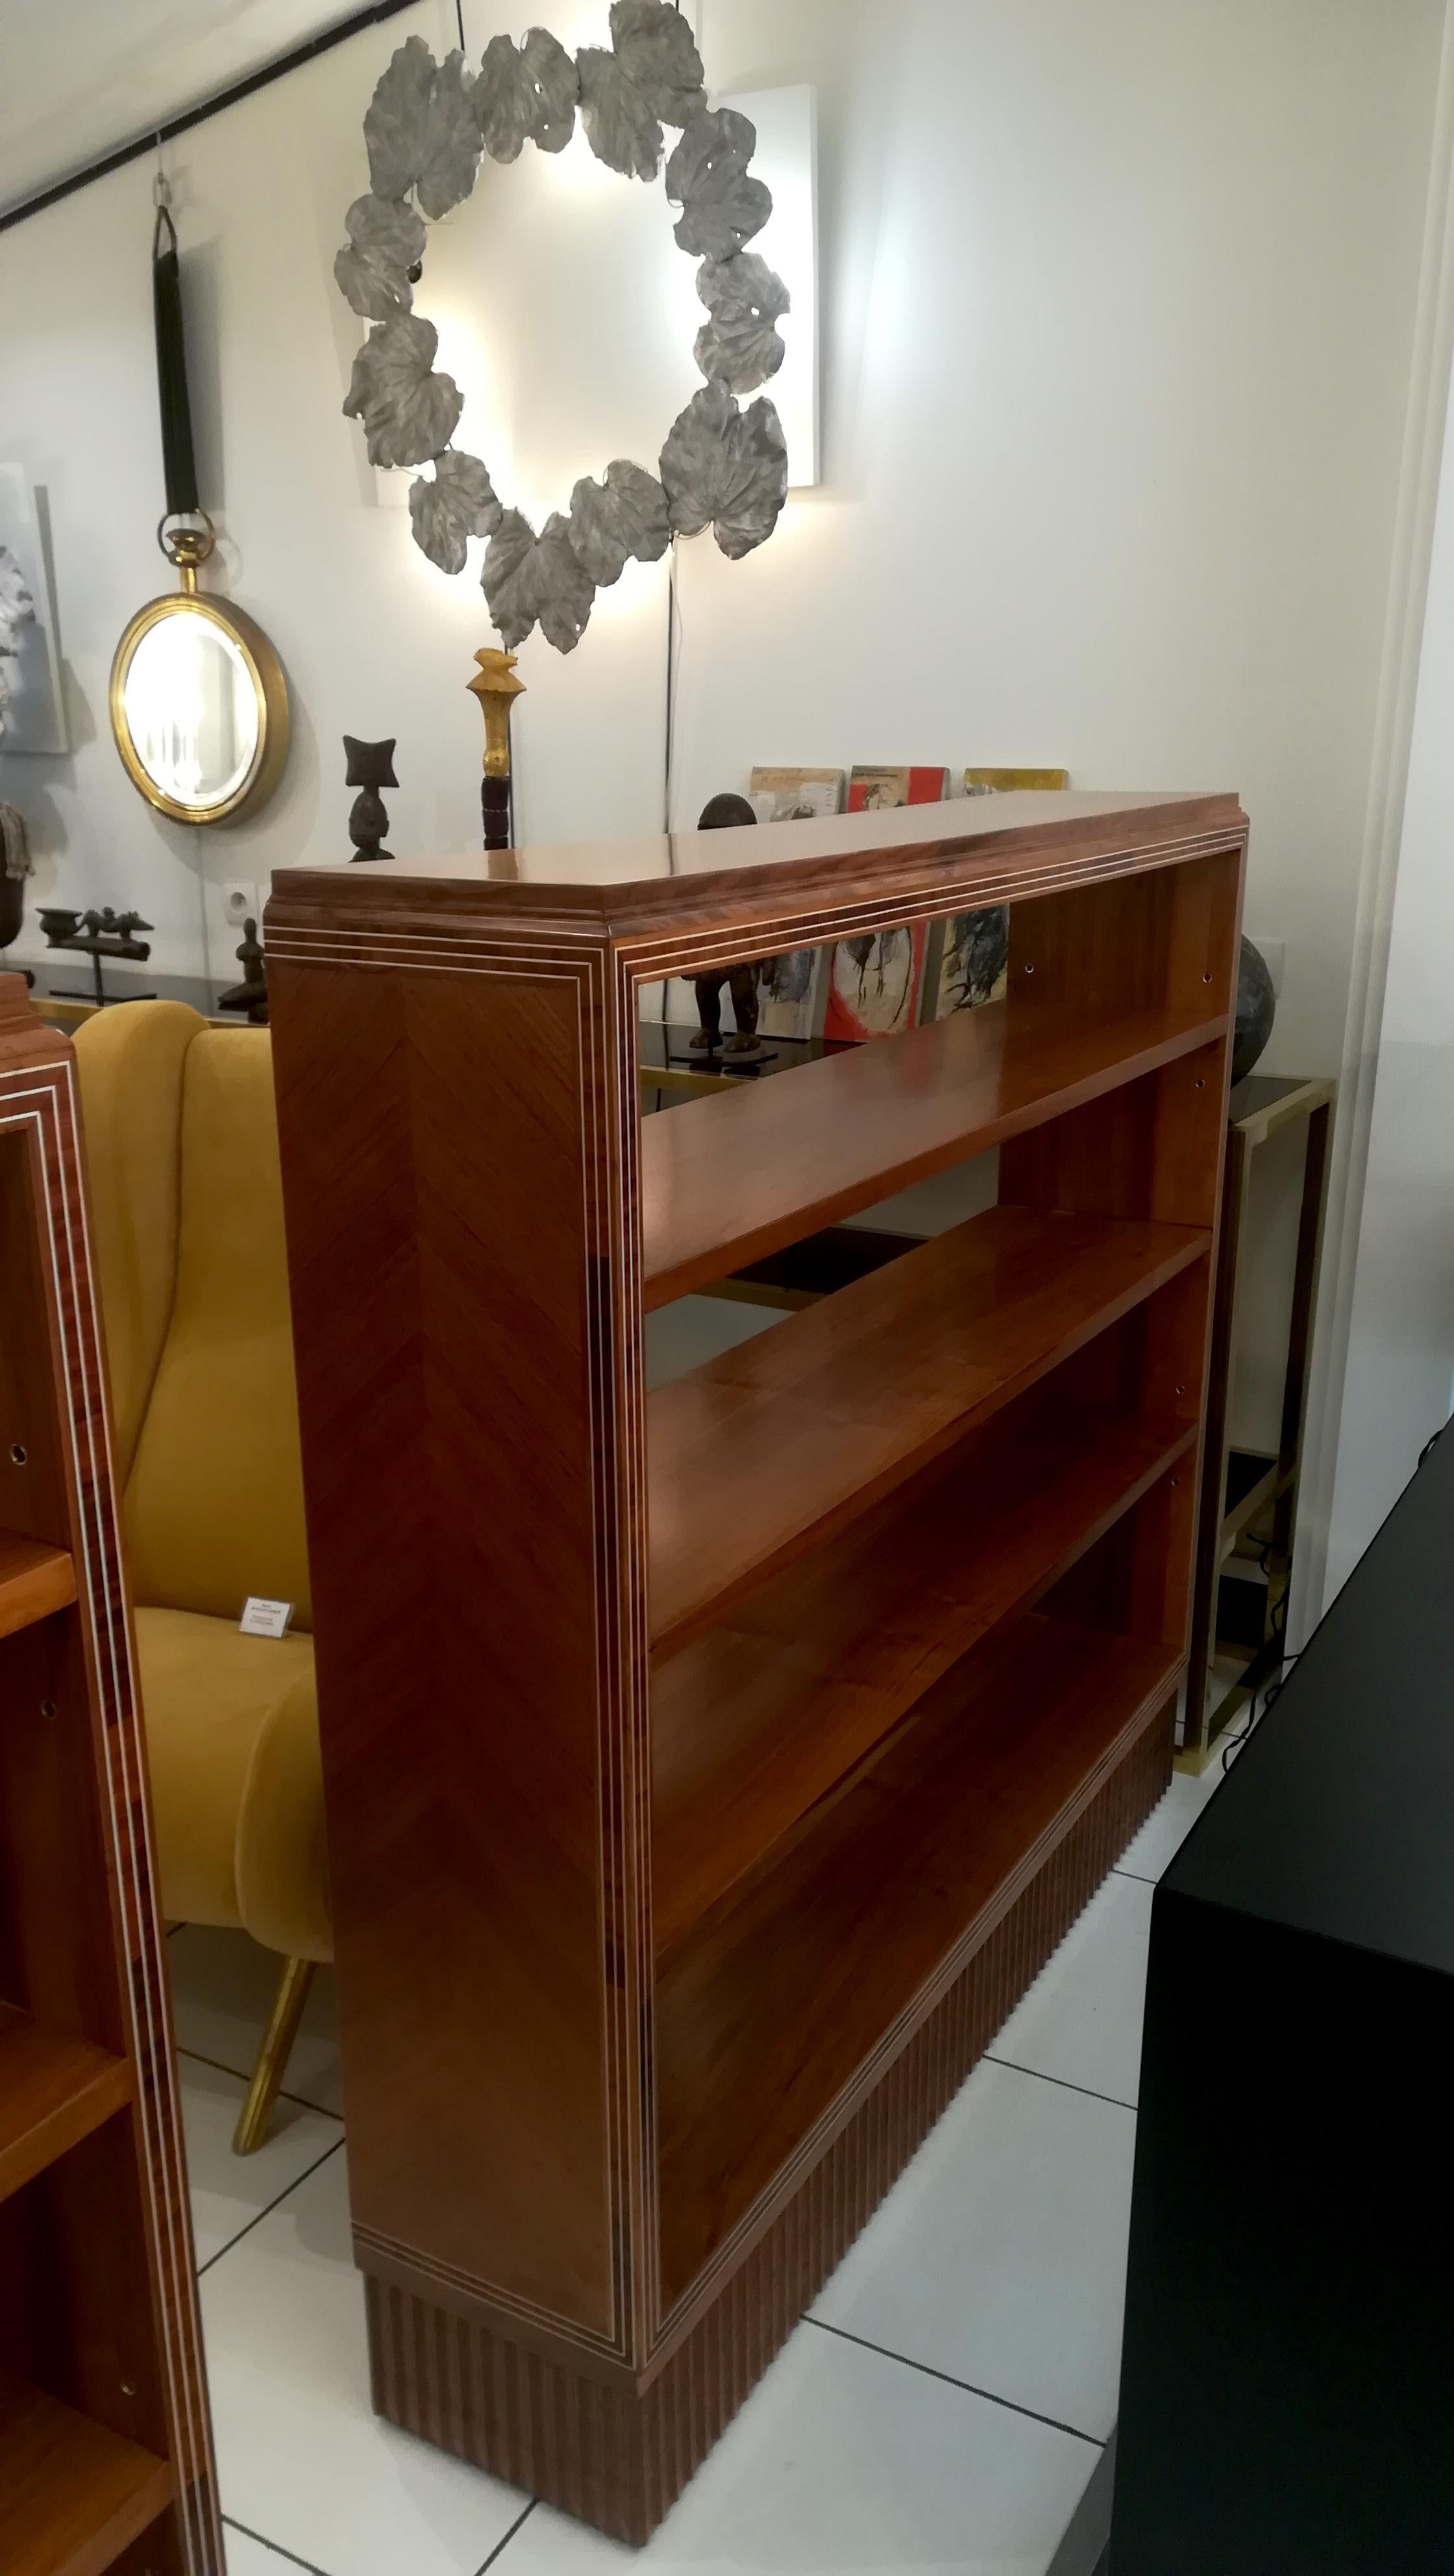 Art Deco bookshelf, circa 1930
One fix shelf in the middle and two shelves adjustable.
(We have a pair available).
  